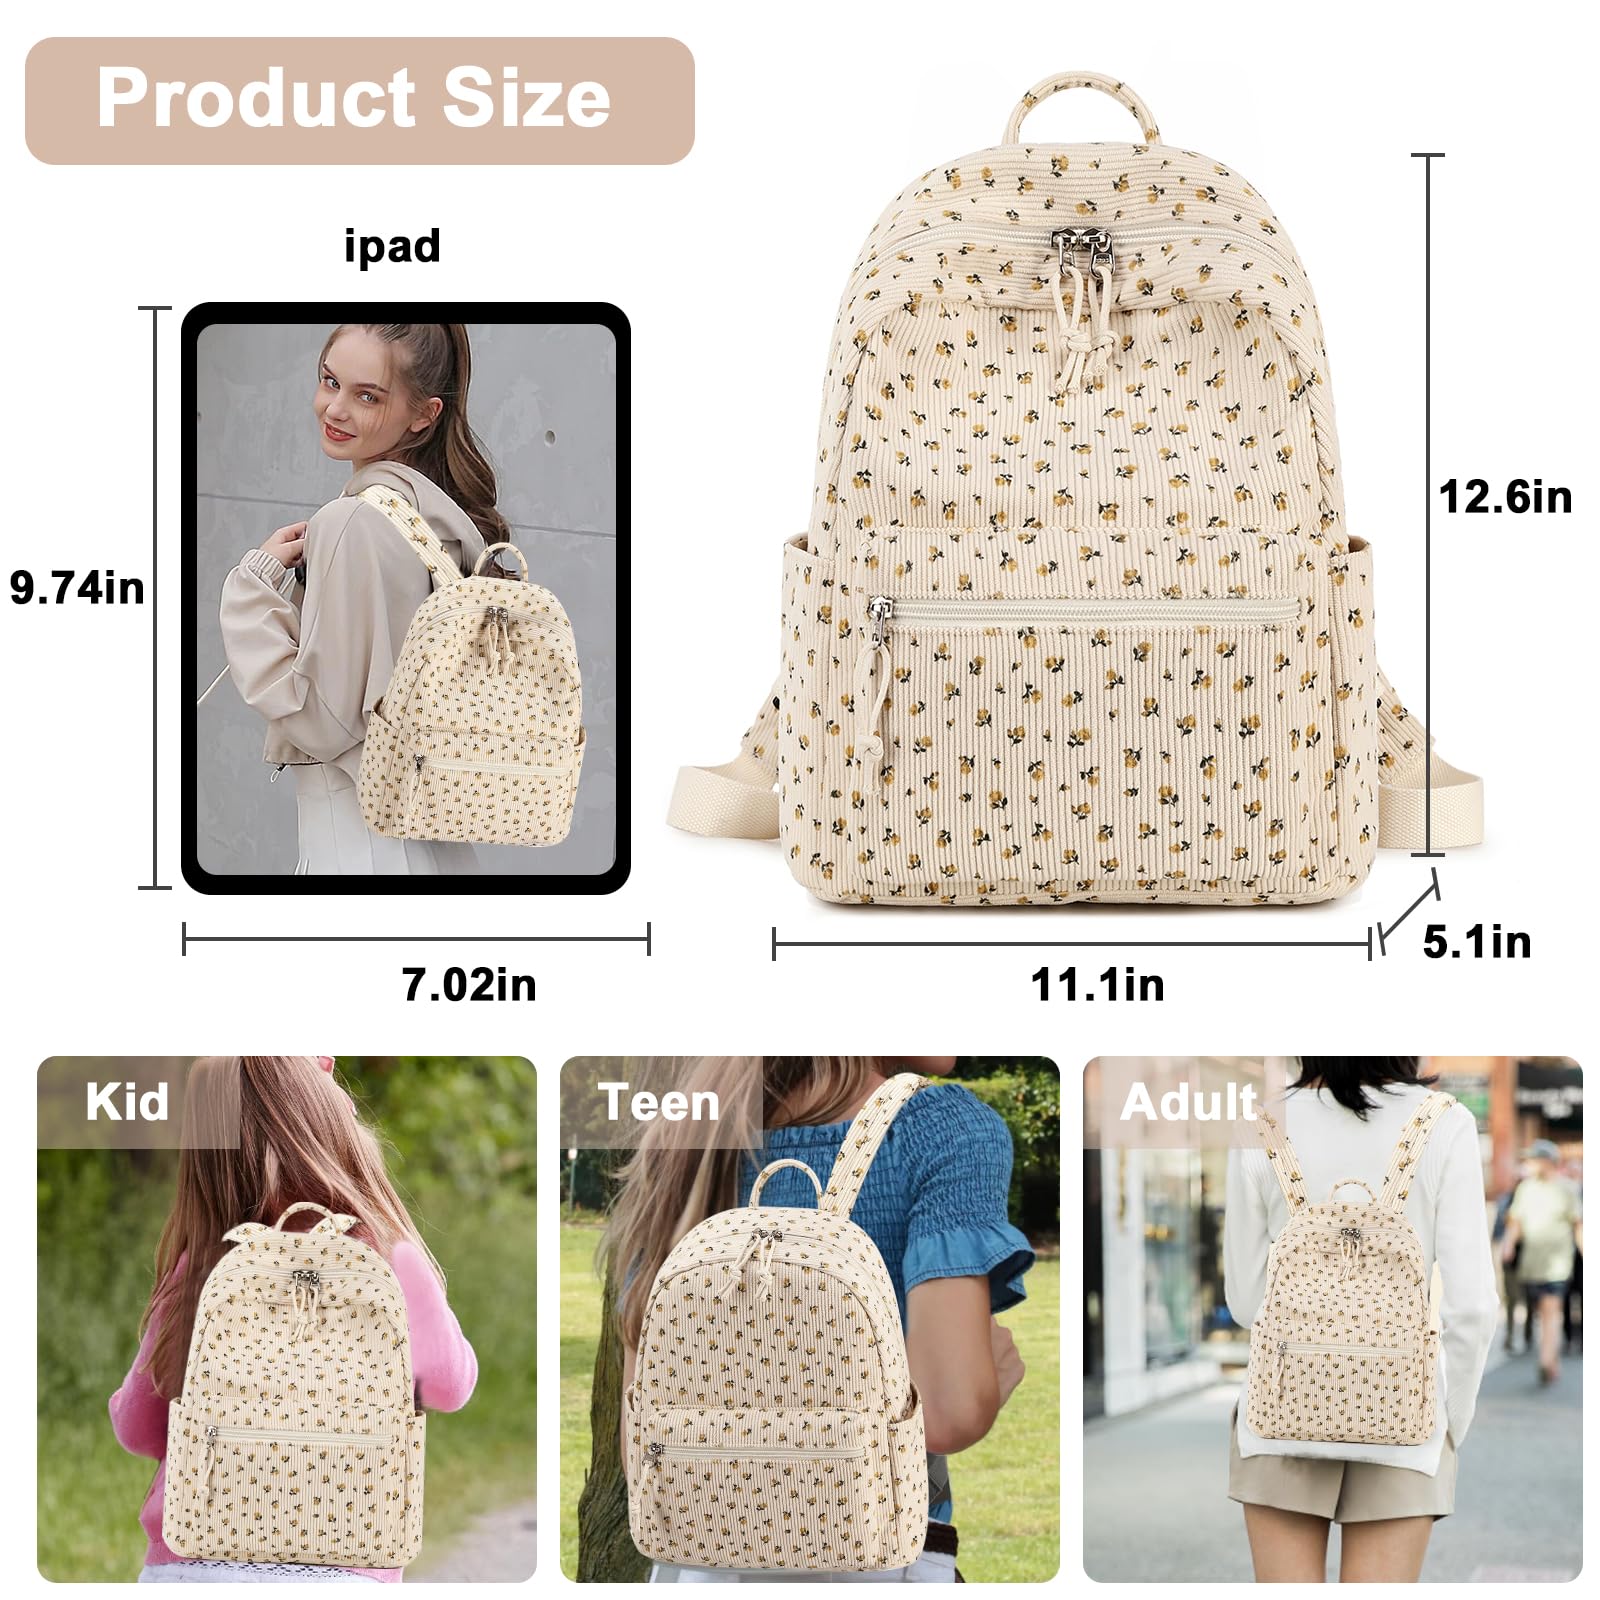 Mini Backpack Women Girls Water-resistant Small Backpack Purse Shoulder Bag for Womens Adult Kids School Travel